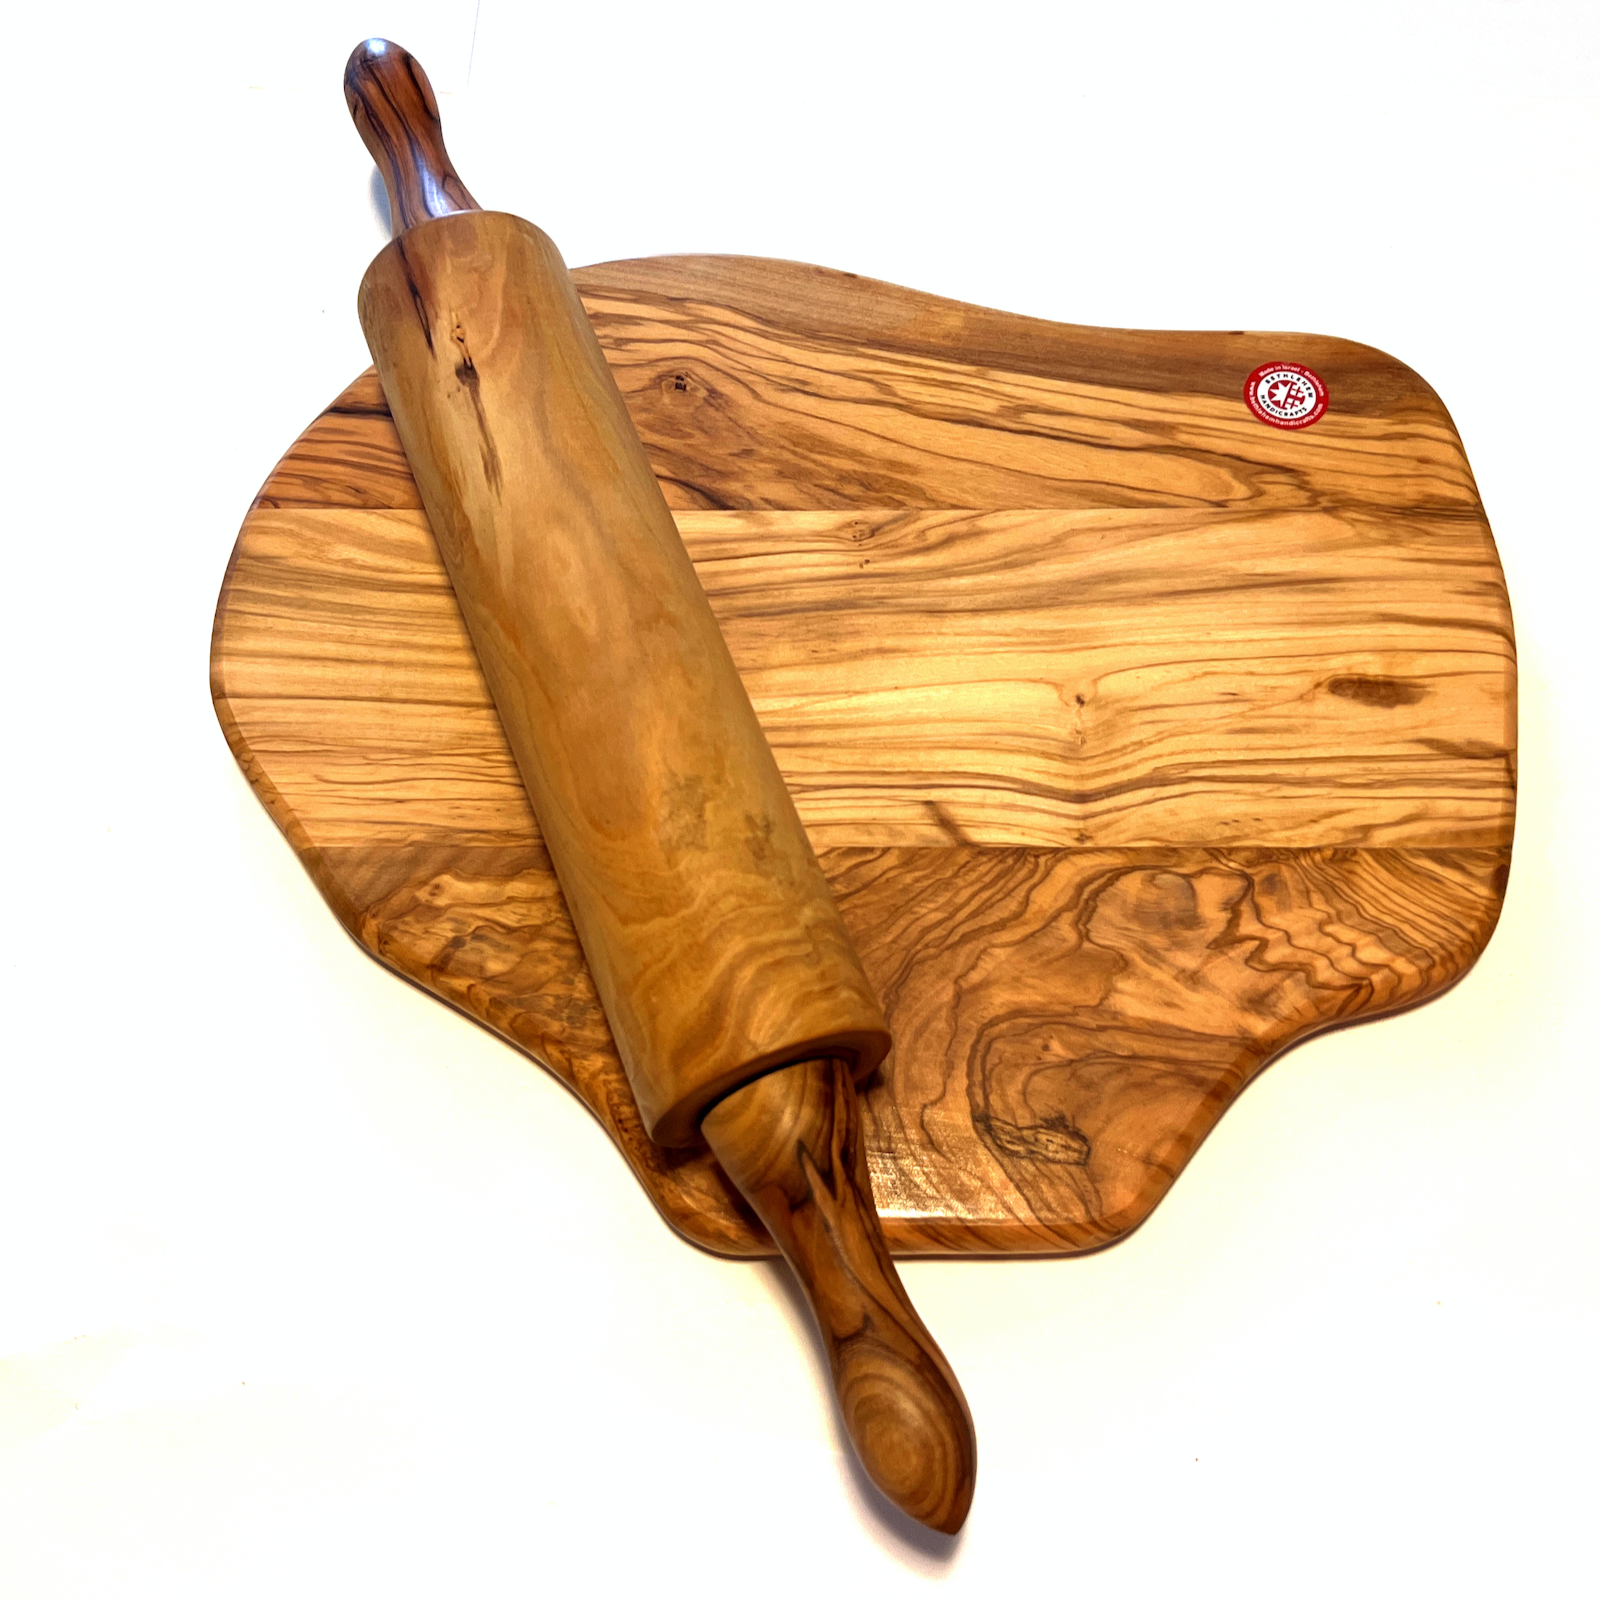 Medium Wooden Cutting Board with Rolling Pin 